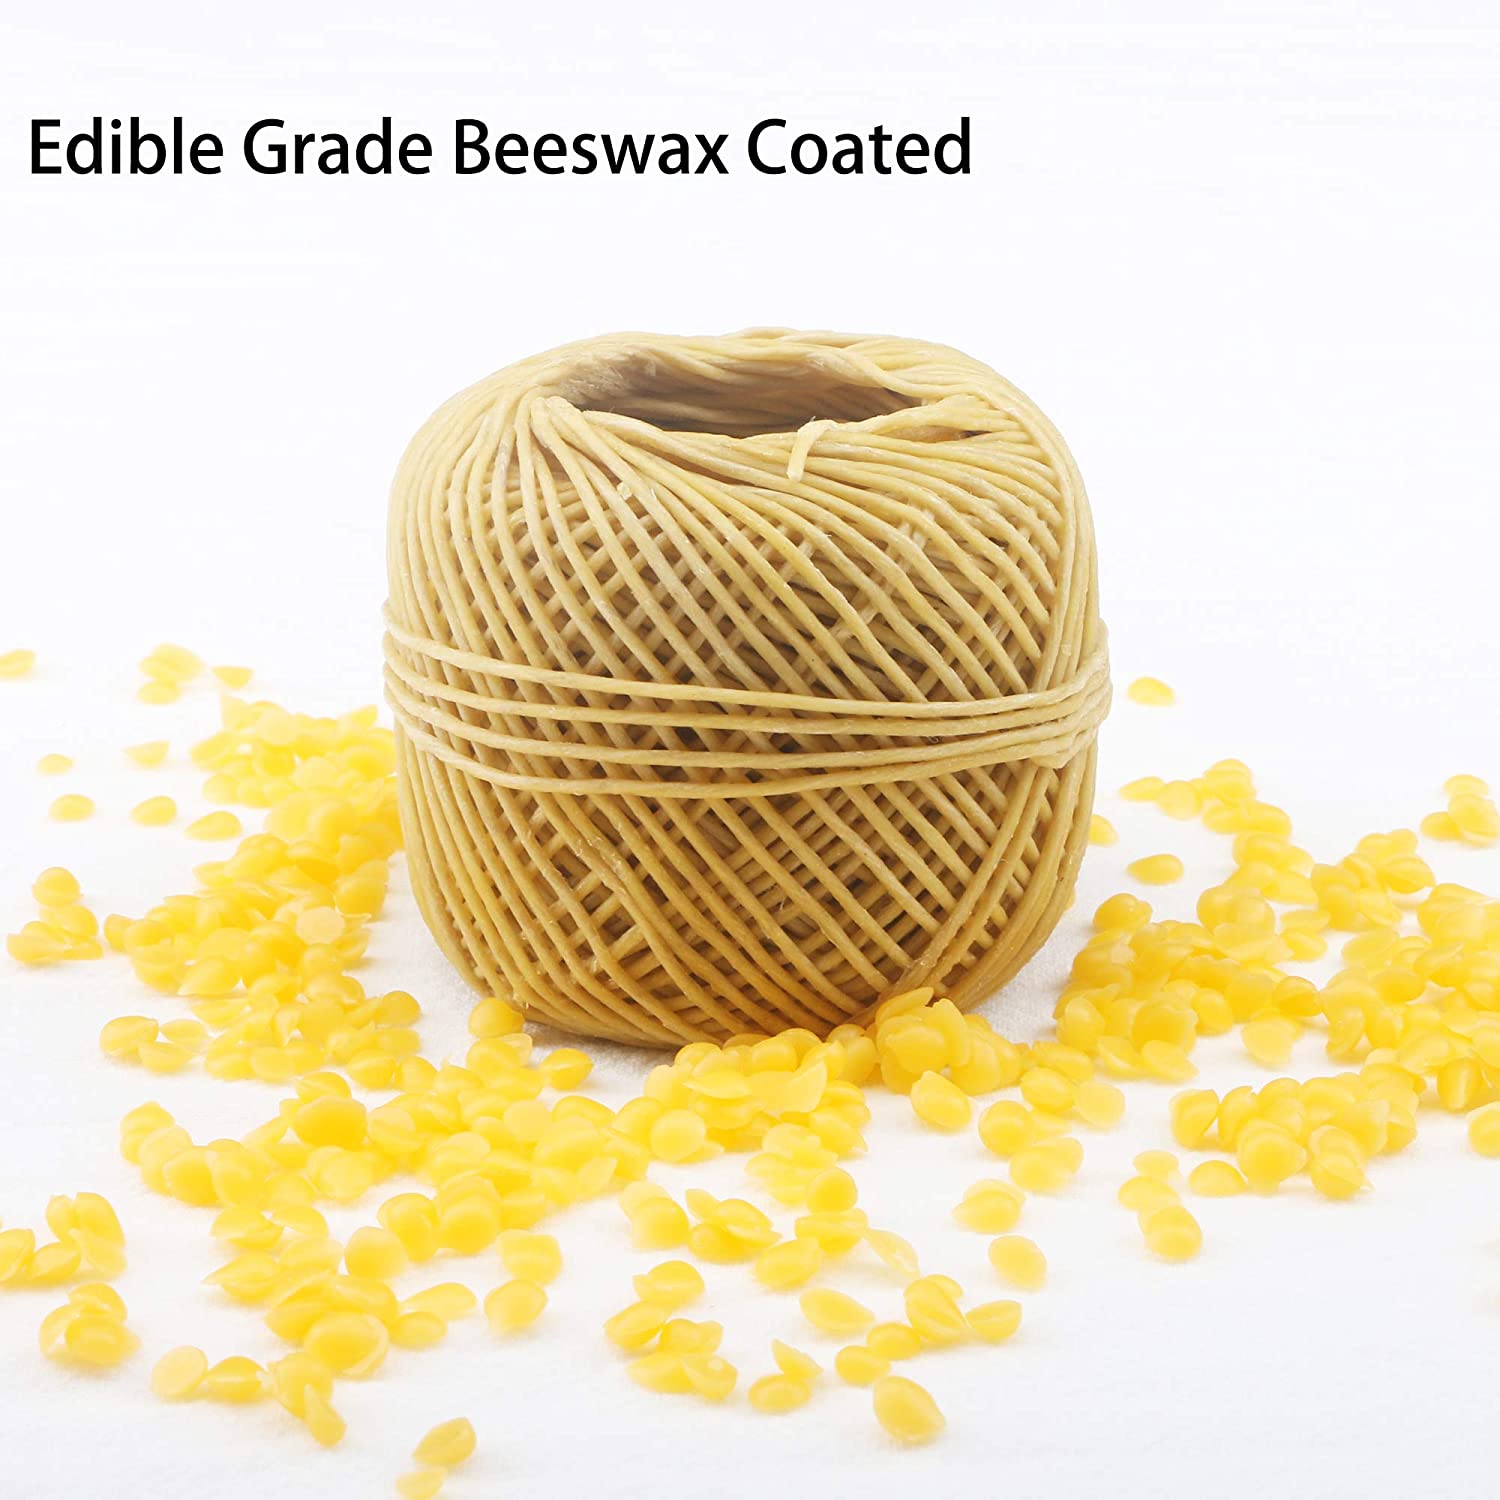 MILIVIXAY Thick Hemp Wick with Natural Beeswax Coating, Edible